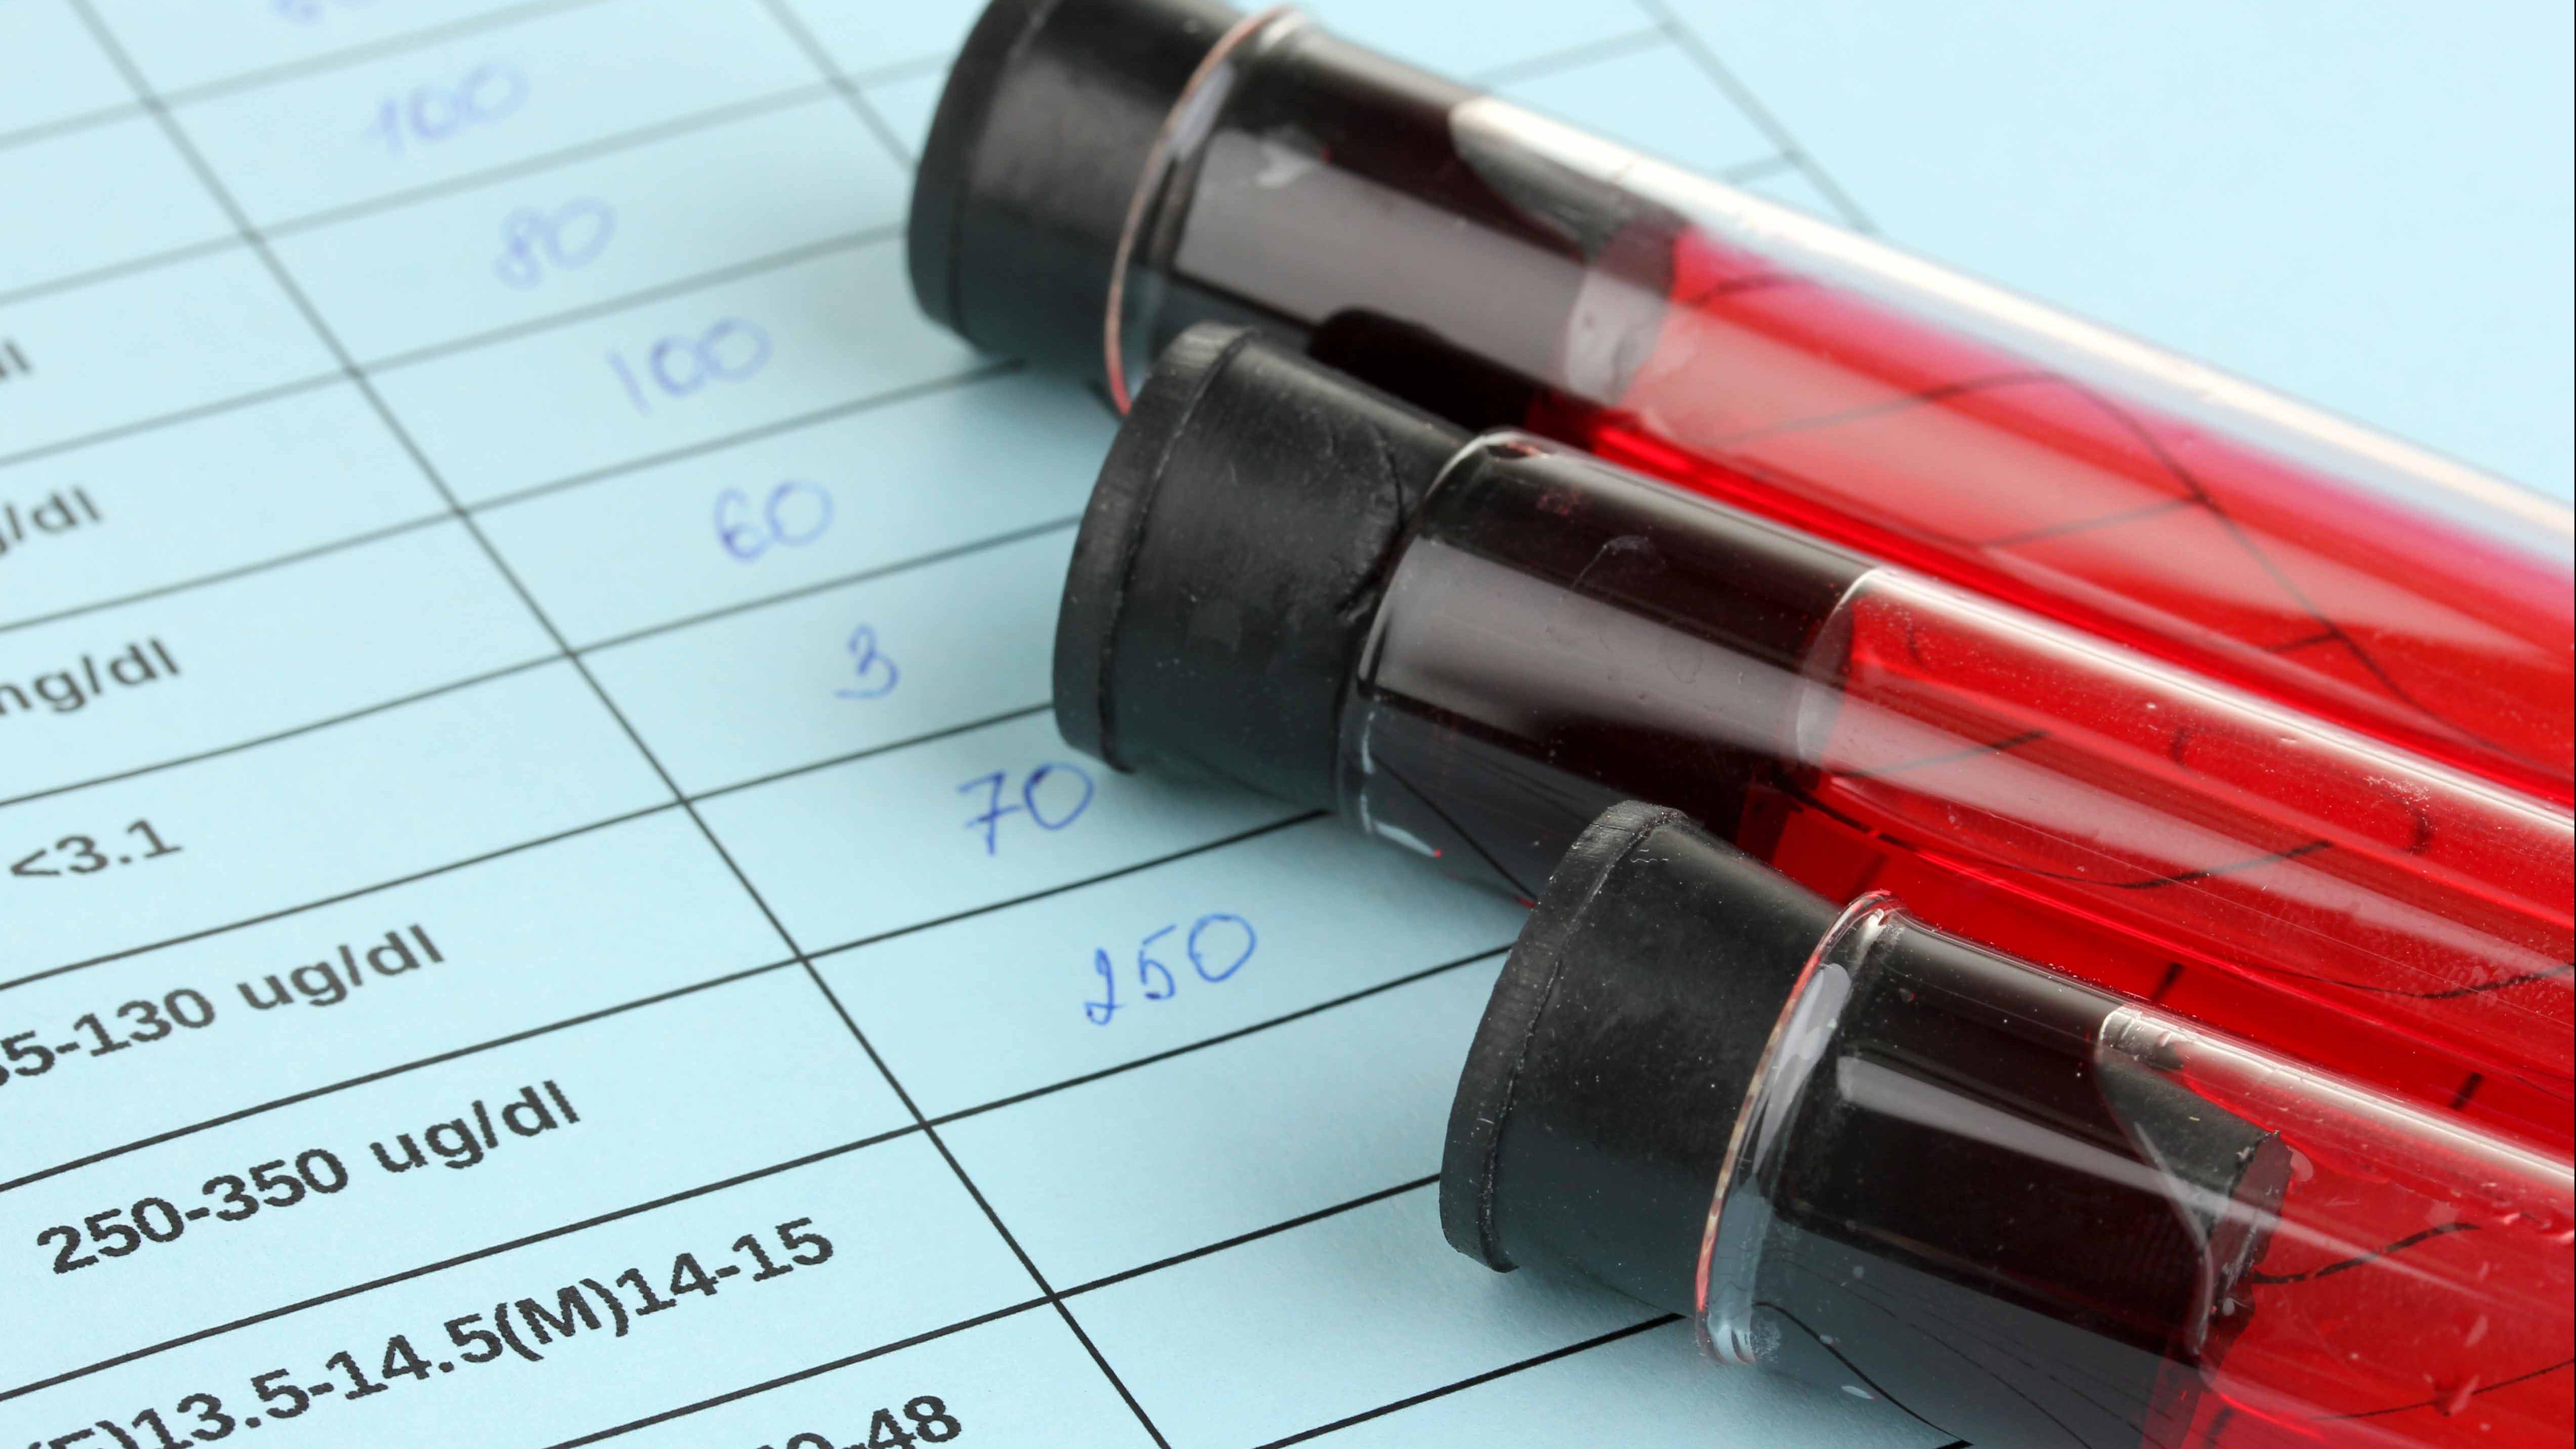 Blood vials laid on top of a medical chart.